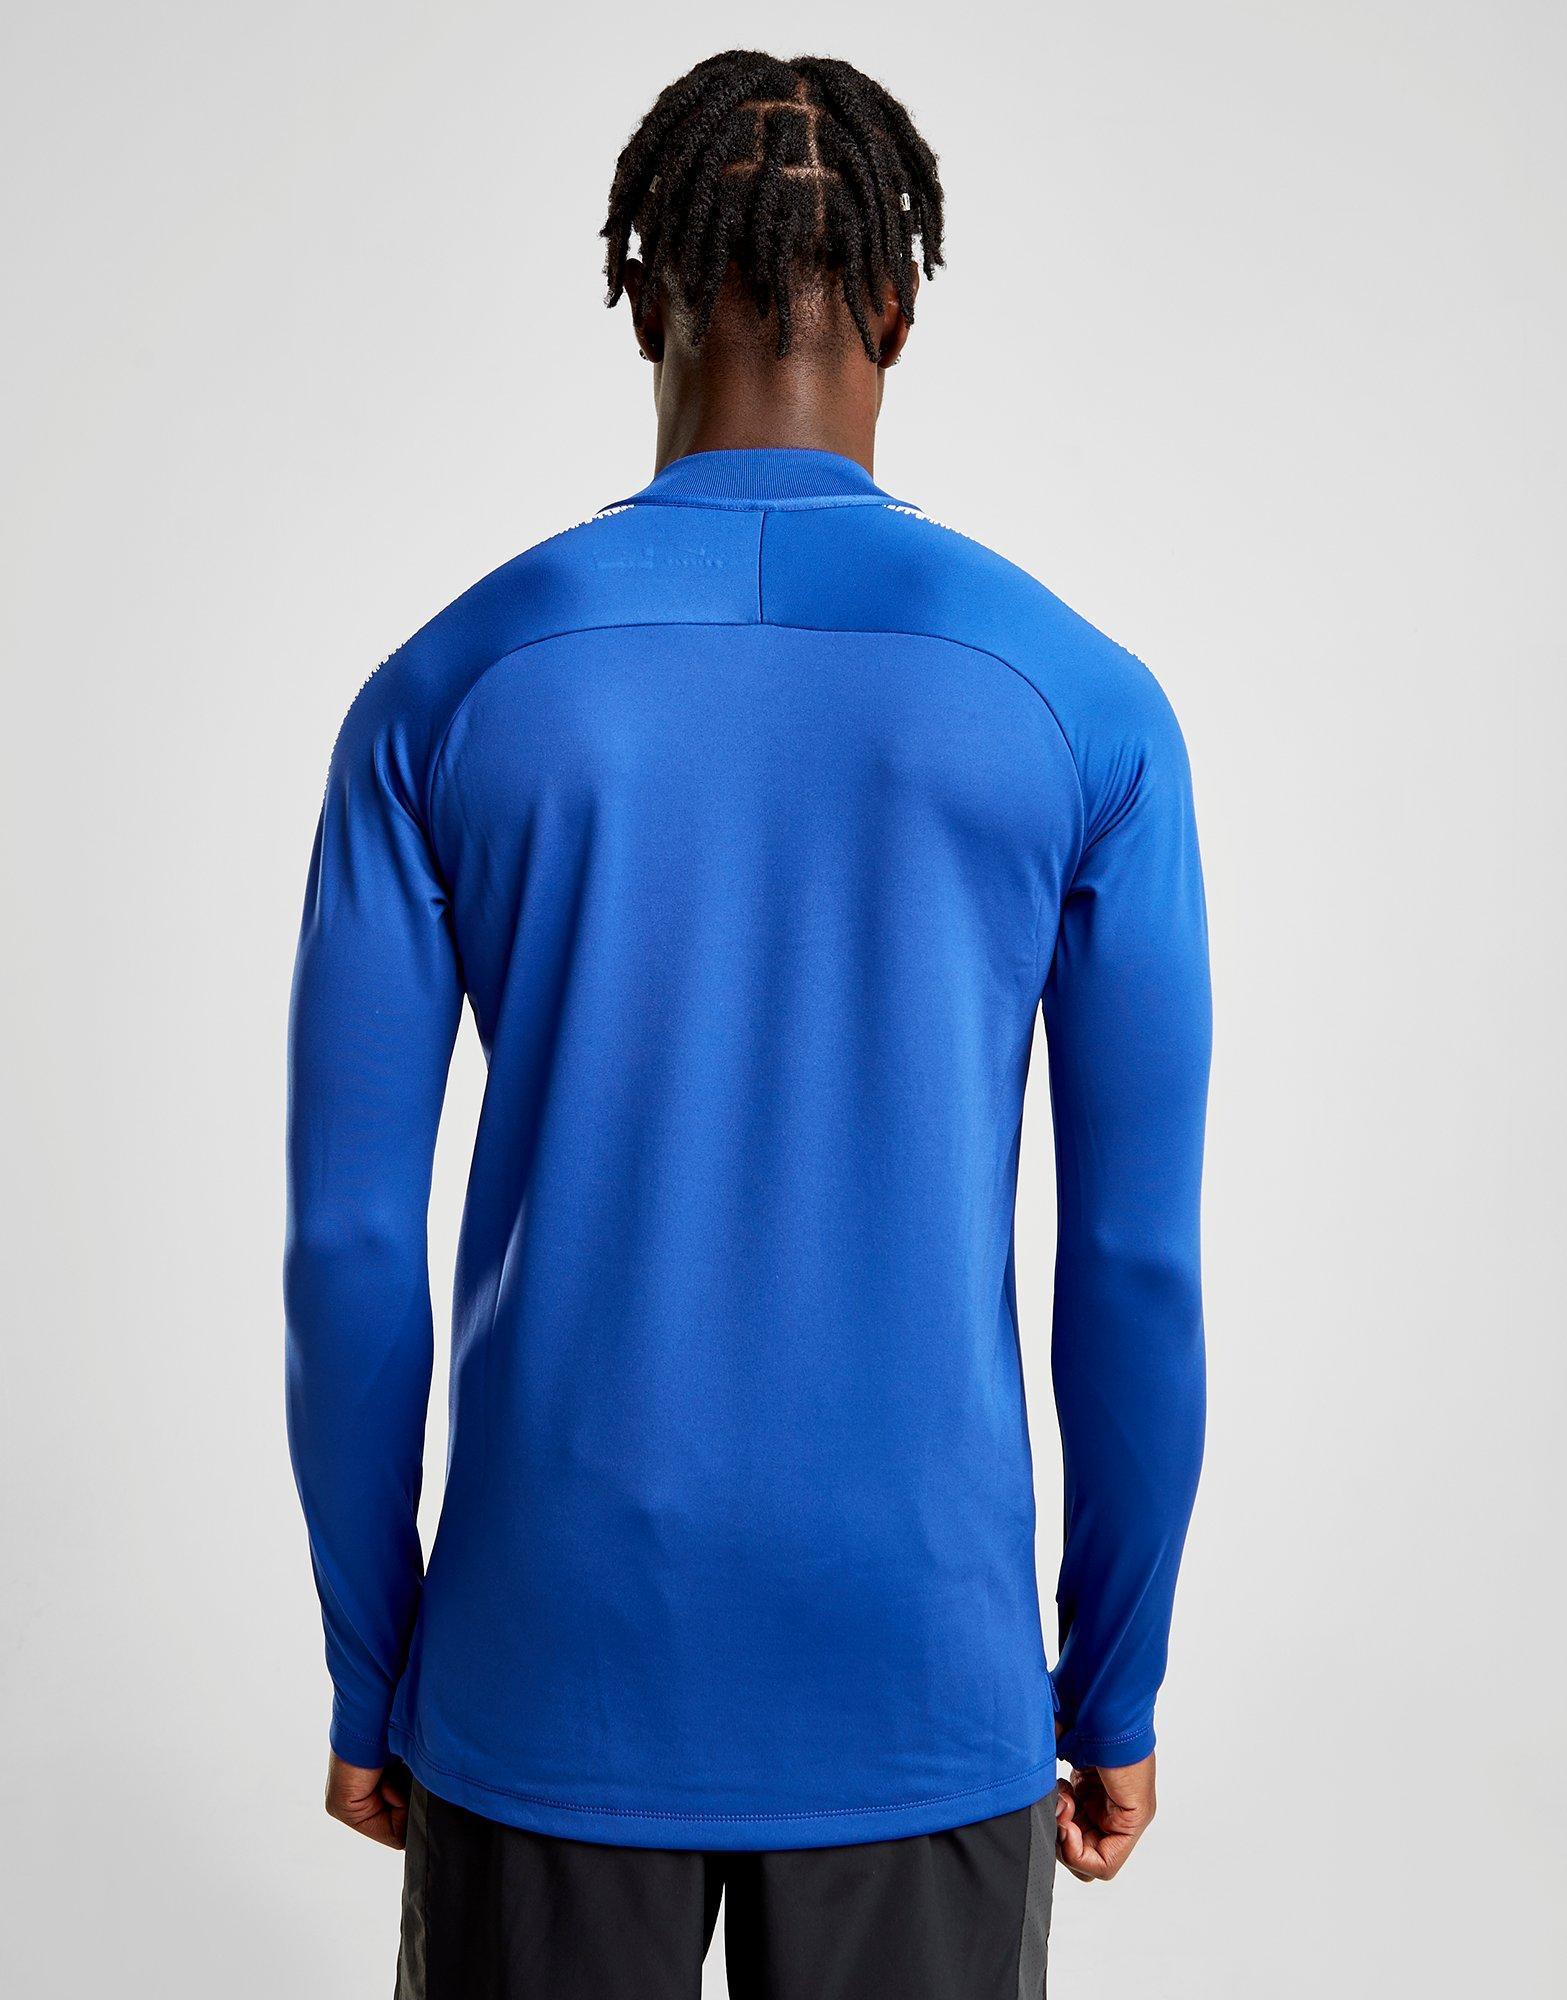 Nike Chelsea Fc 2018/19 Squad Drill Top in s/s (Blue) for Men - Lyst